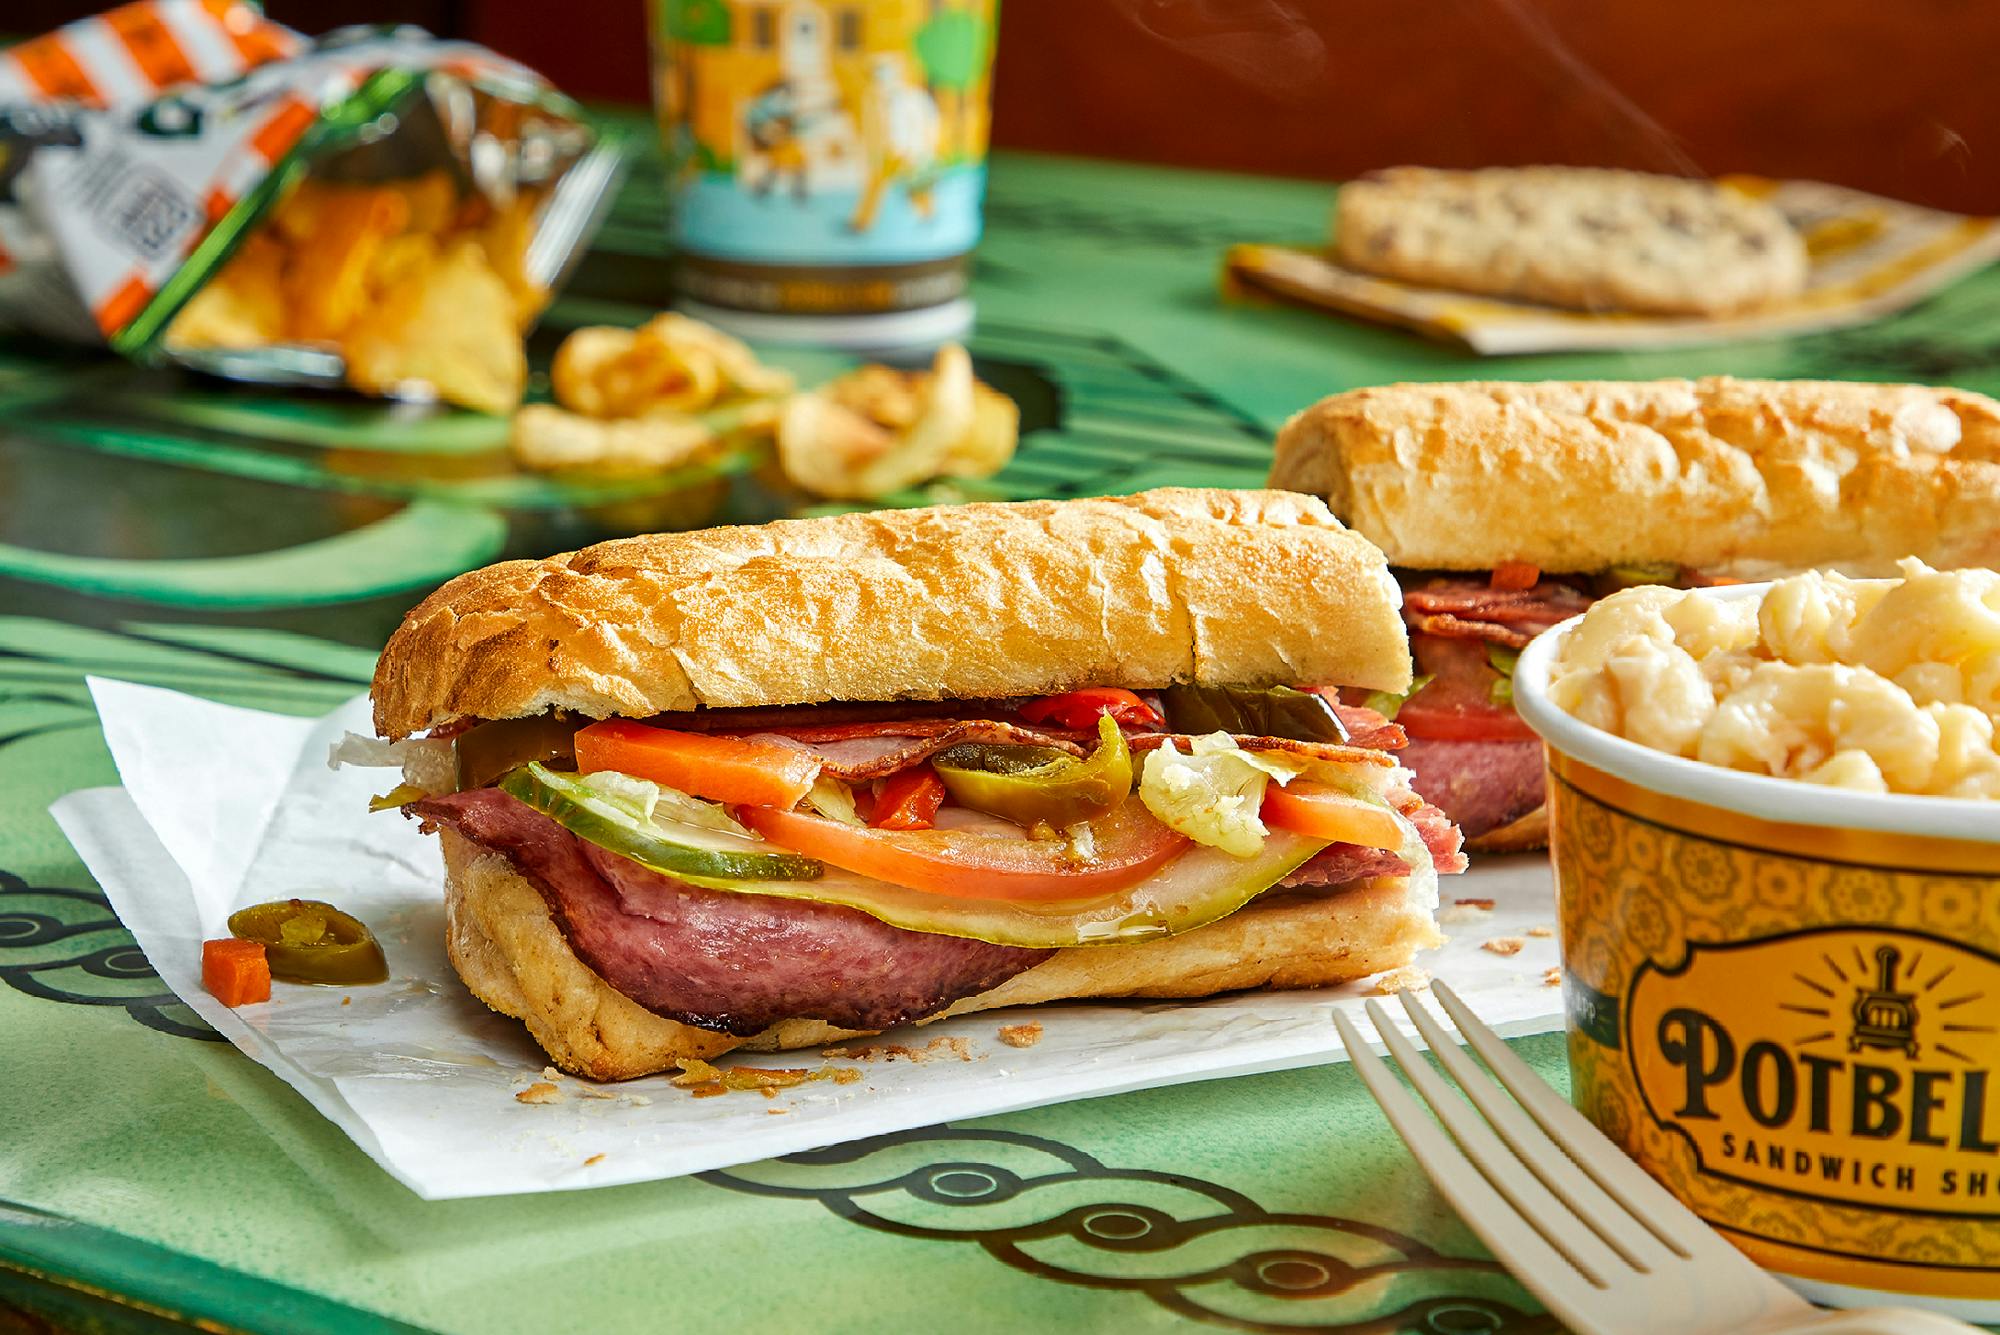 – SPONSORED: Save, Save, Save, with These Awesome Subway  Coupons!